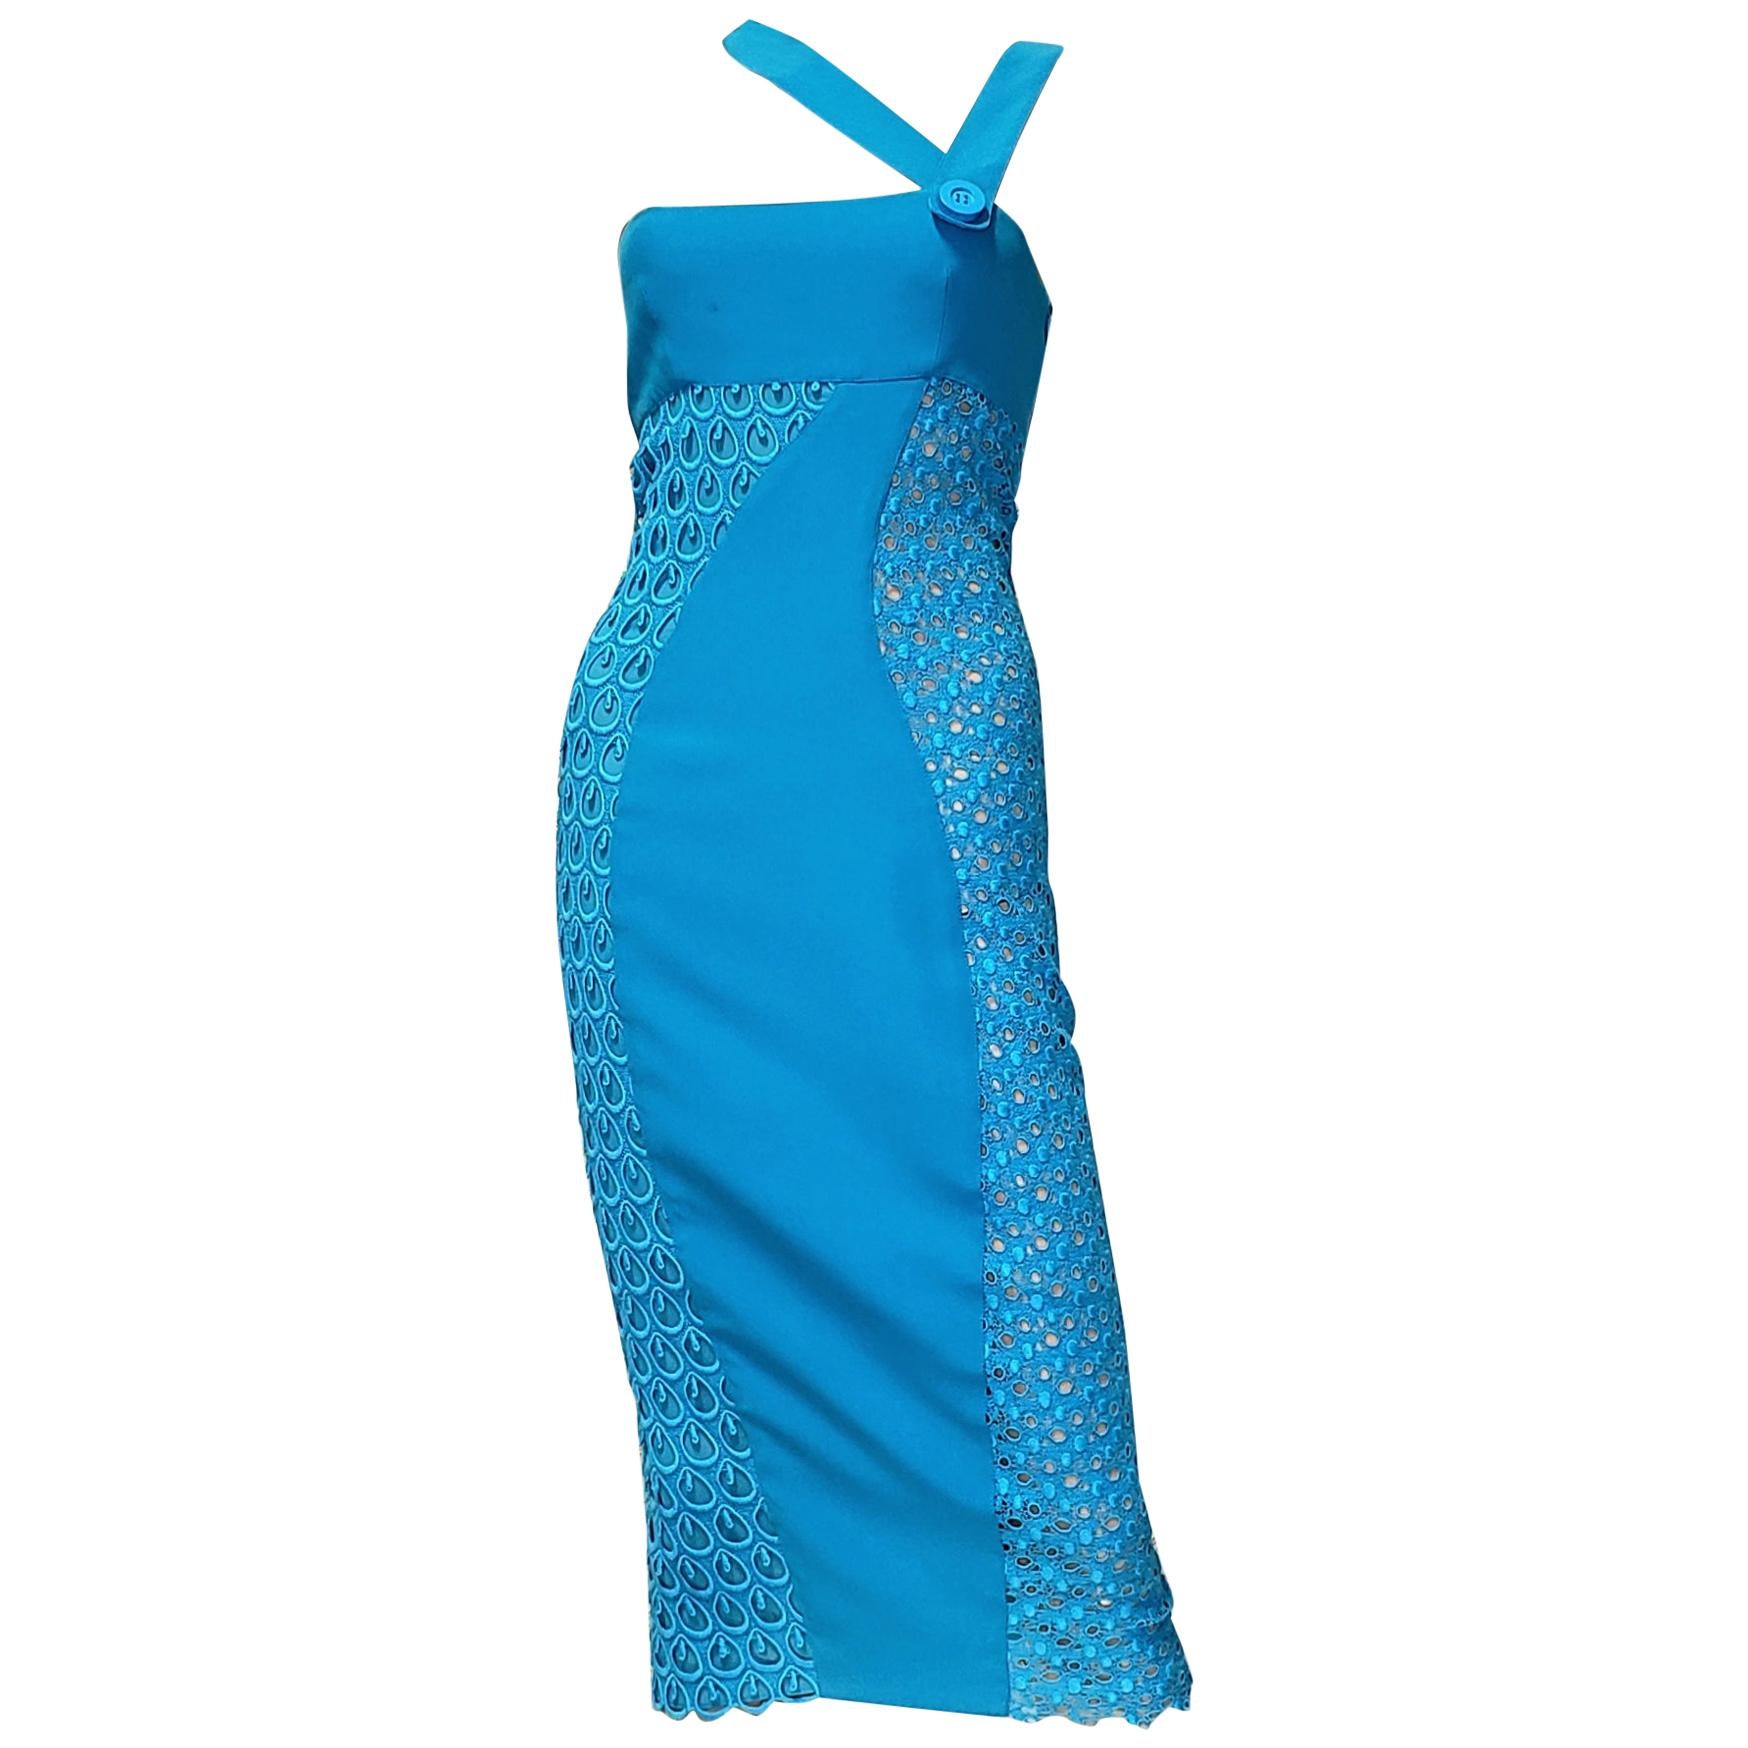 S/S 2011 look # 34 NEW VERSACE BLUE SILK EMBROIDERED Dress 38 - 2 For Sale